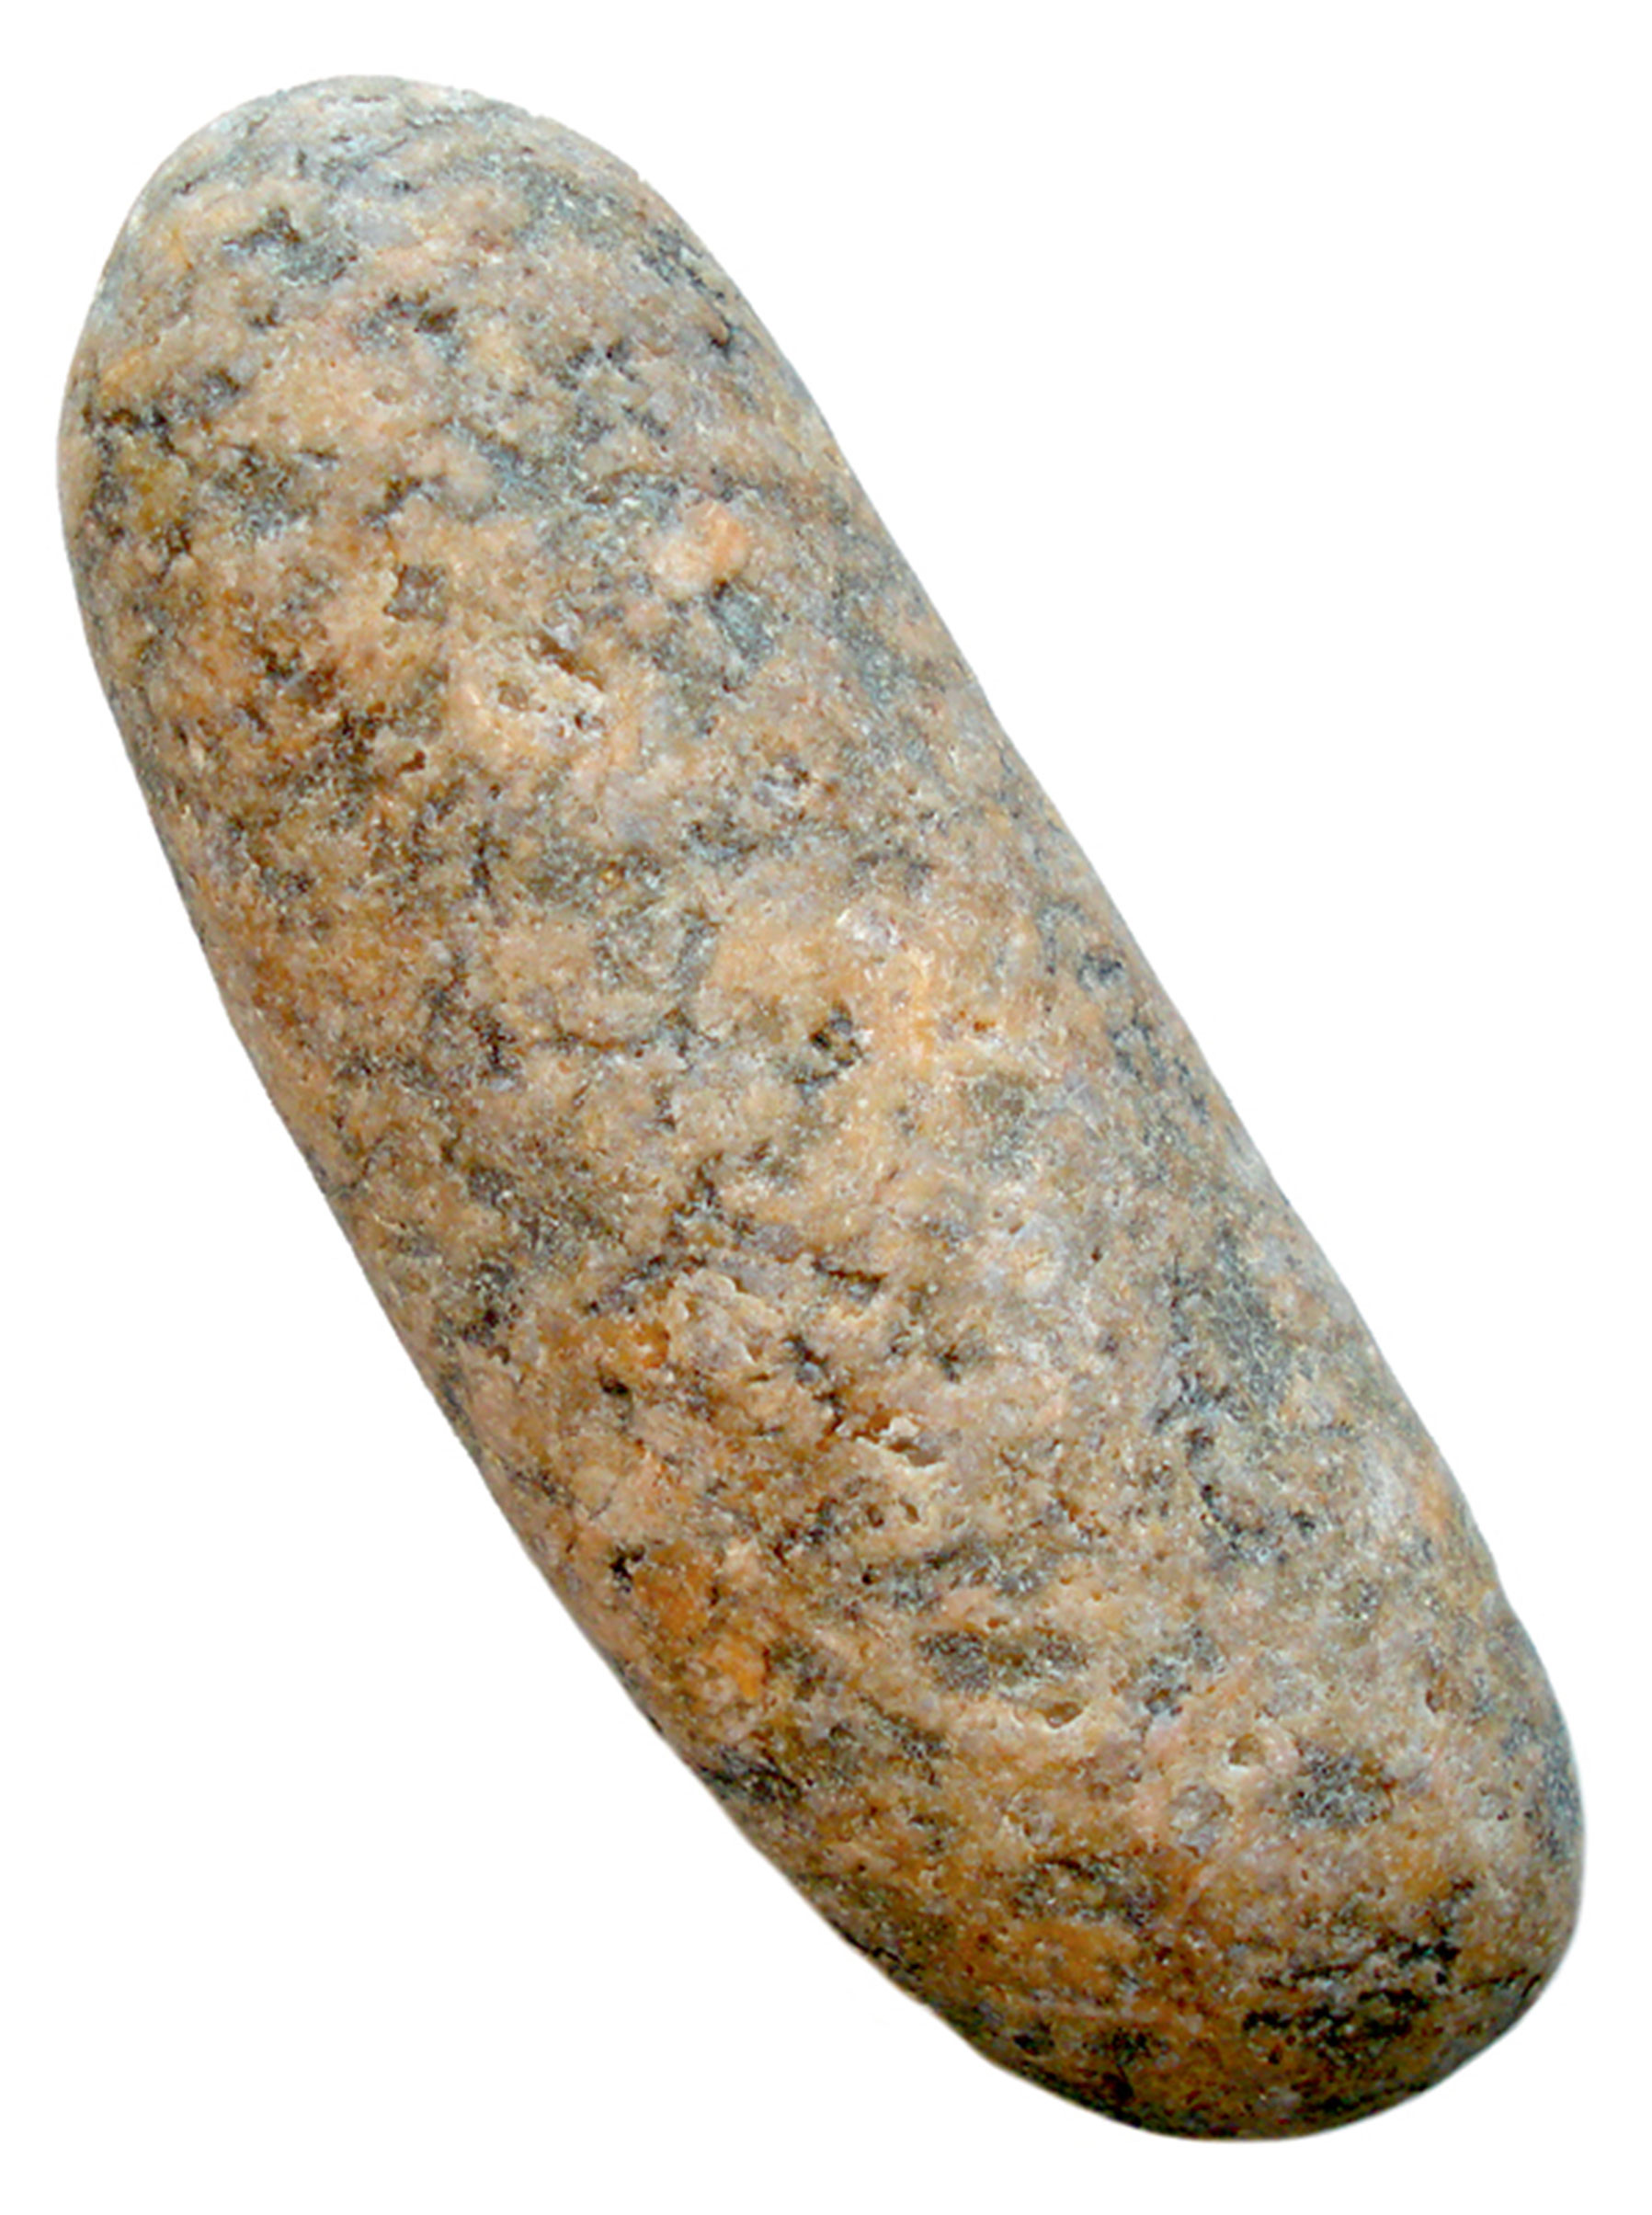 A photograph of a rock which resembles a raw sausage. 